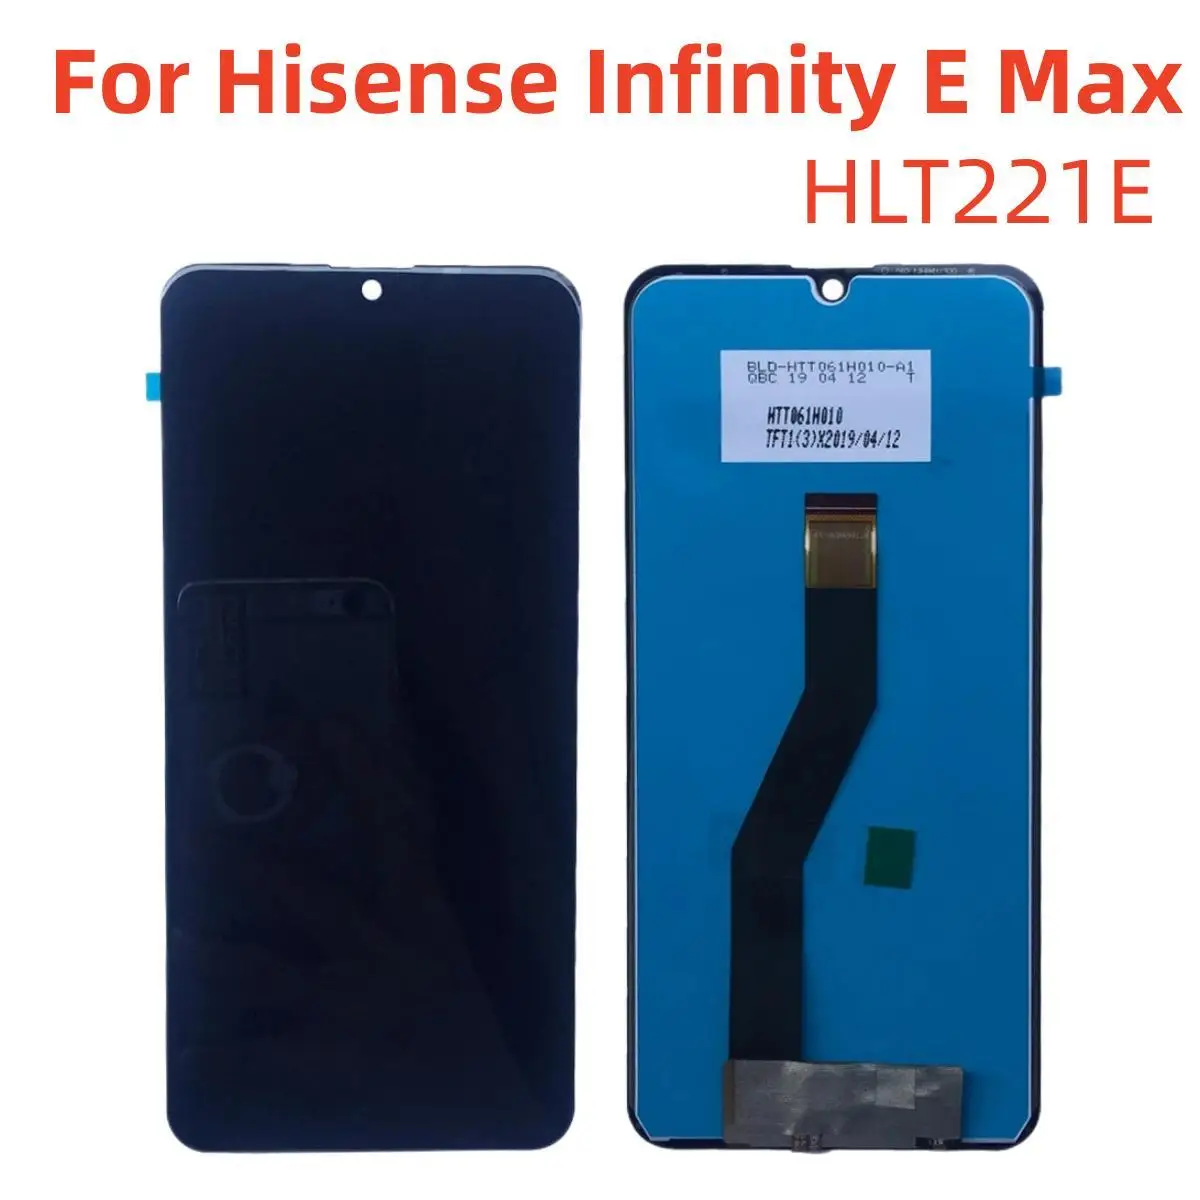 

Mobile LCD Display For Hisense Infinity E Max HLT221E LCD Display With Touch Screen Digitizer Assembly With Tools 3M Sticker